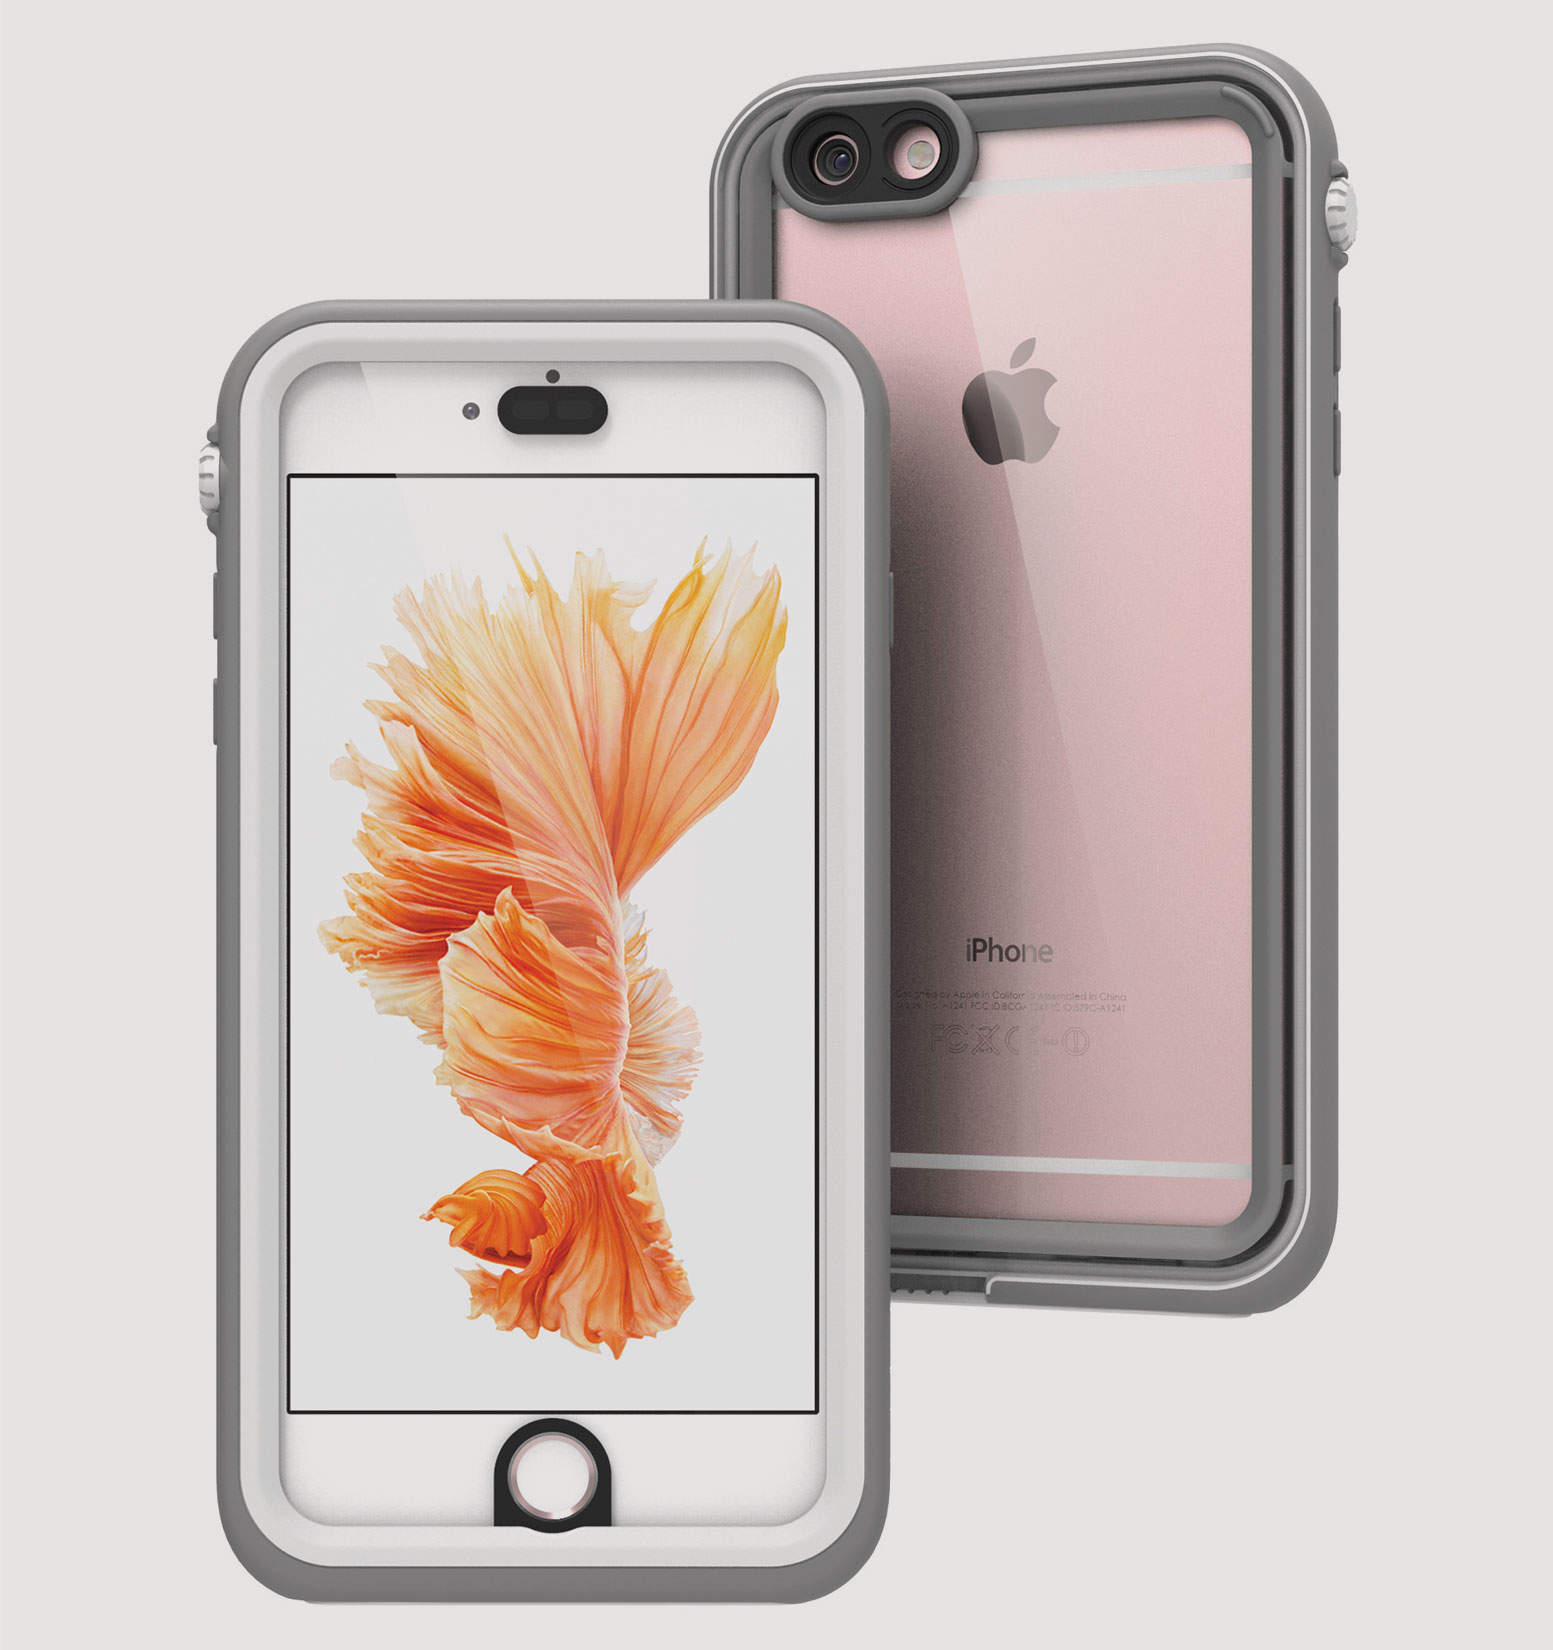 A waterproof case for the iPhone 6s and 6s Plus can protect it in water up to 16 inches deep.